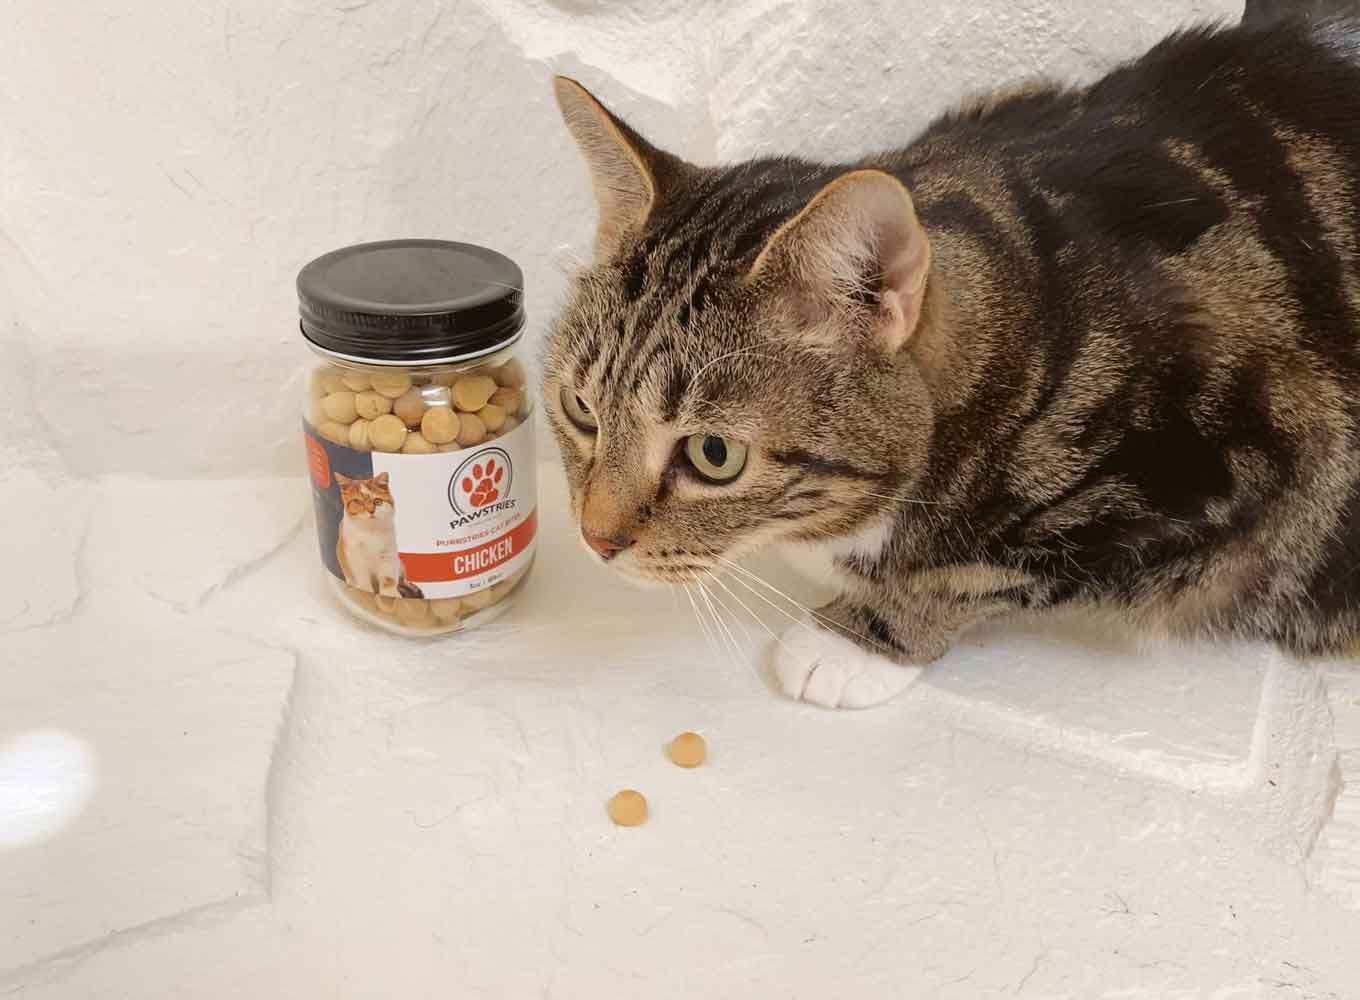 A cat snacks on some treats